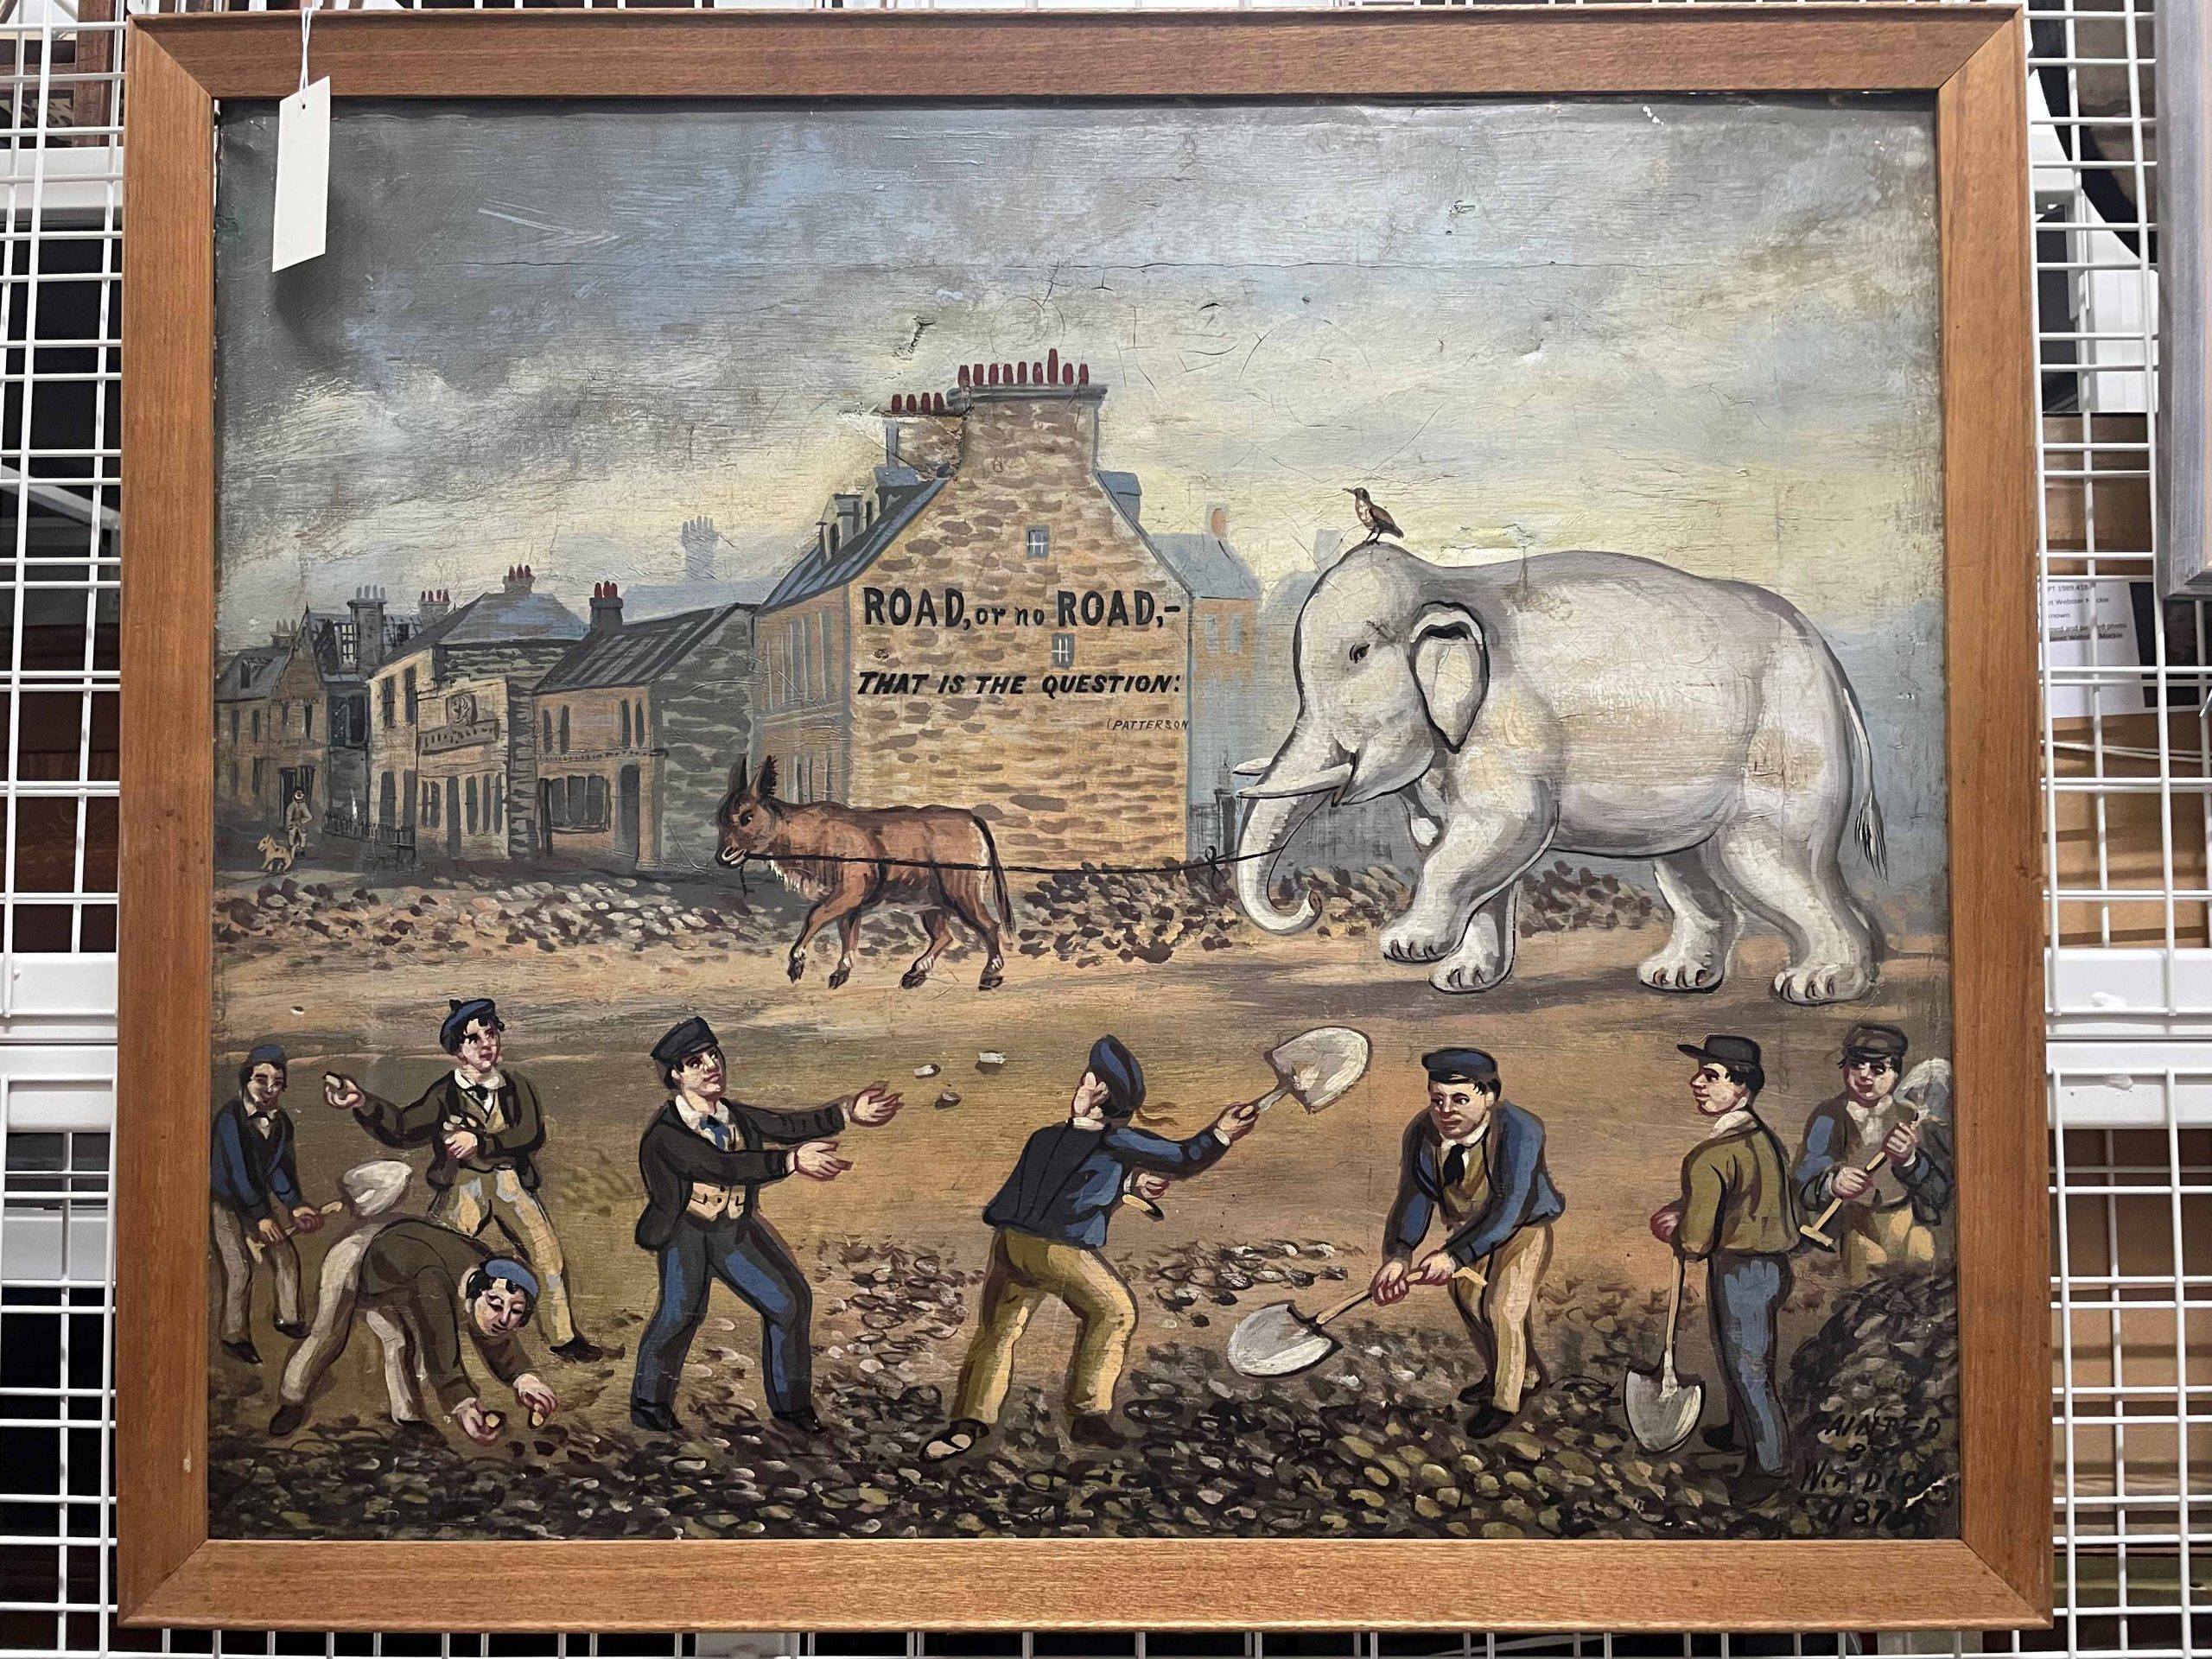 Satirical painting showing the construction of the Links Road. Several workmen are shown in the foreground, with a large white elephant being led by a donkey shown in the foreground. 'Road or no road that is the question' is written on the gable end of a building in the centre background.